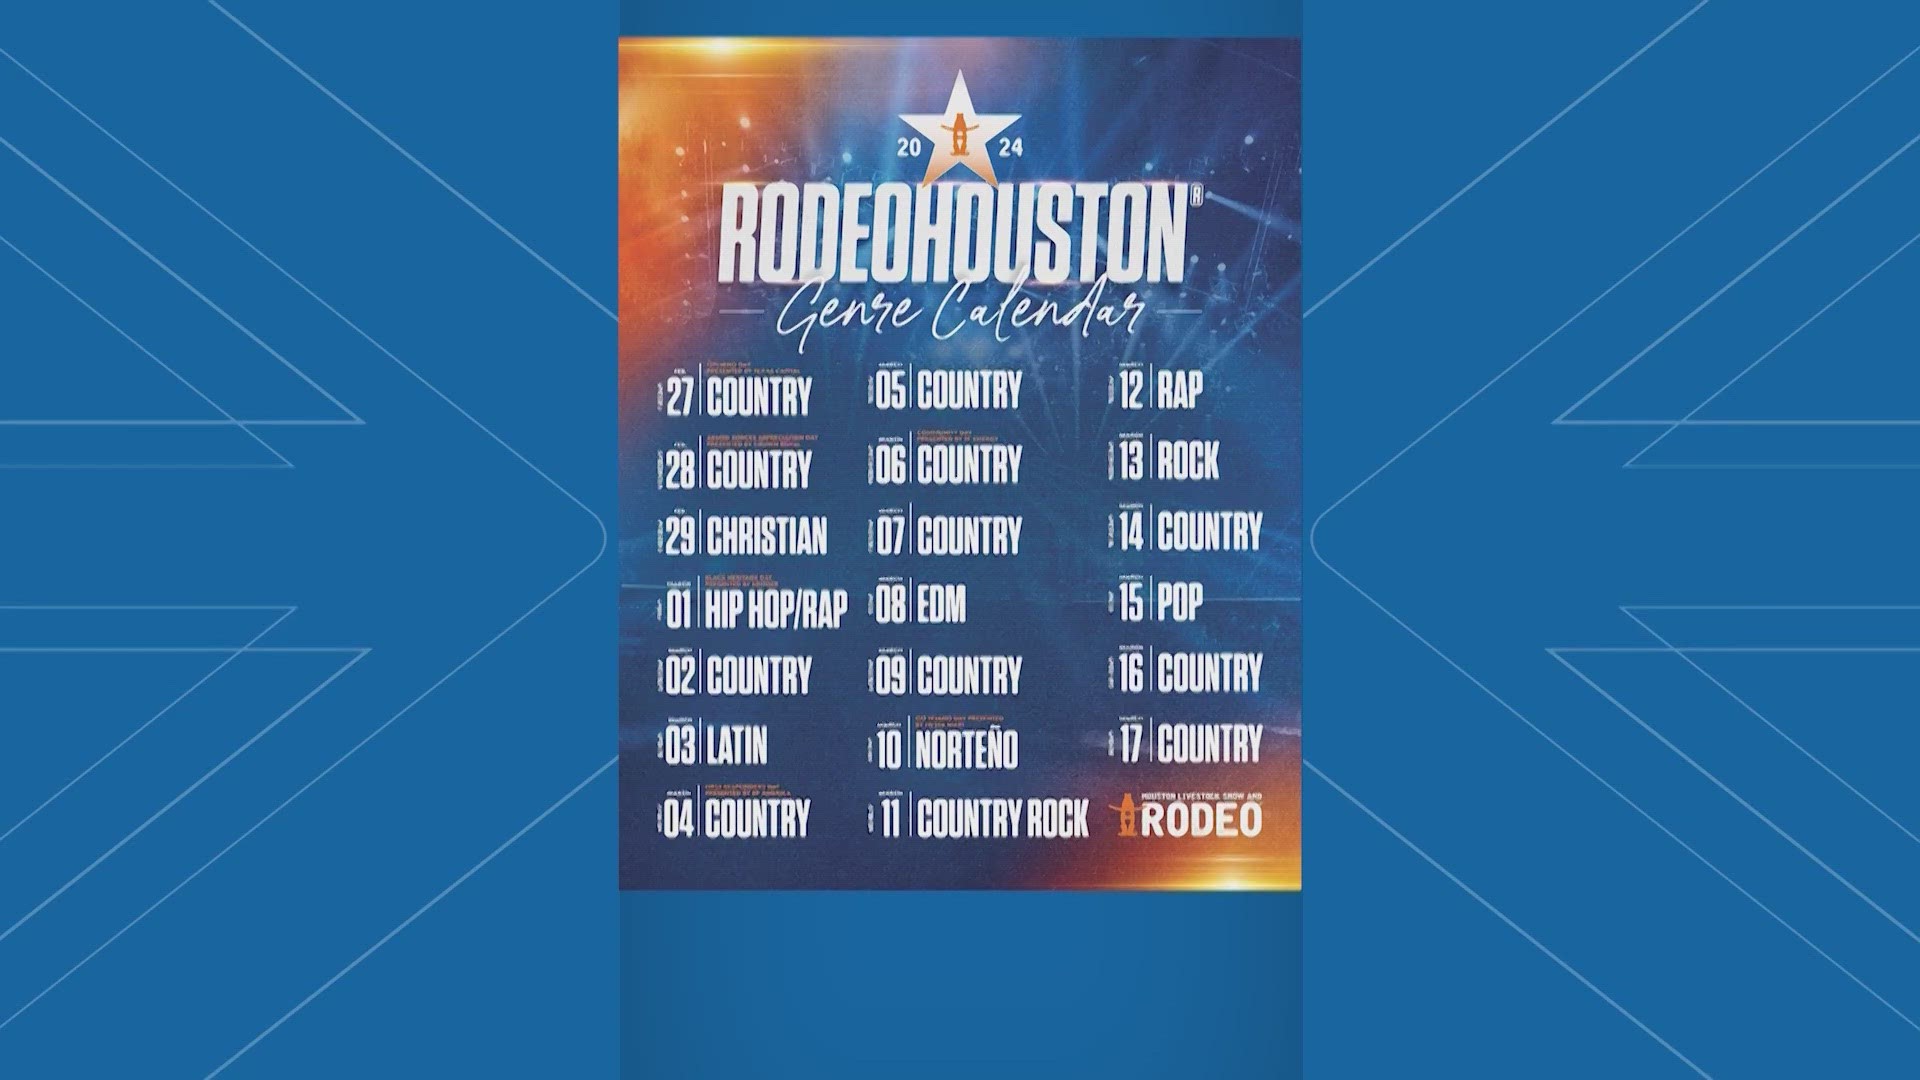 RodeoHouston has unveiled its Star Entertainer Genre Calendar for the 2024 Houston Livestock Show and Rodeo.